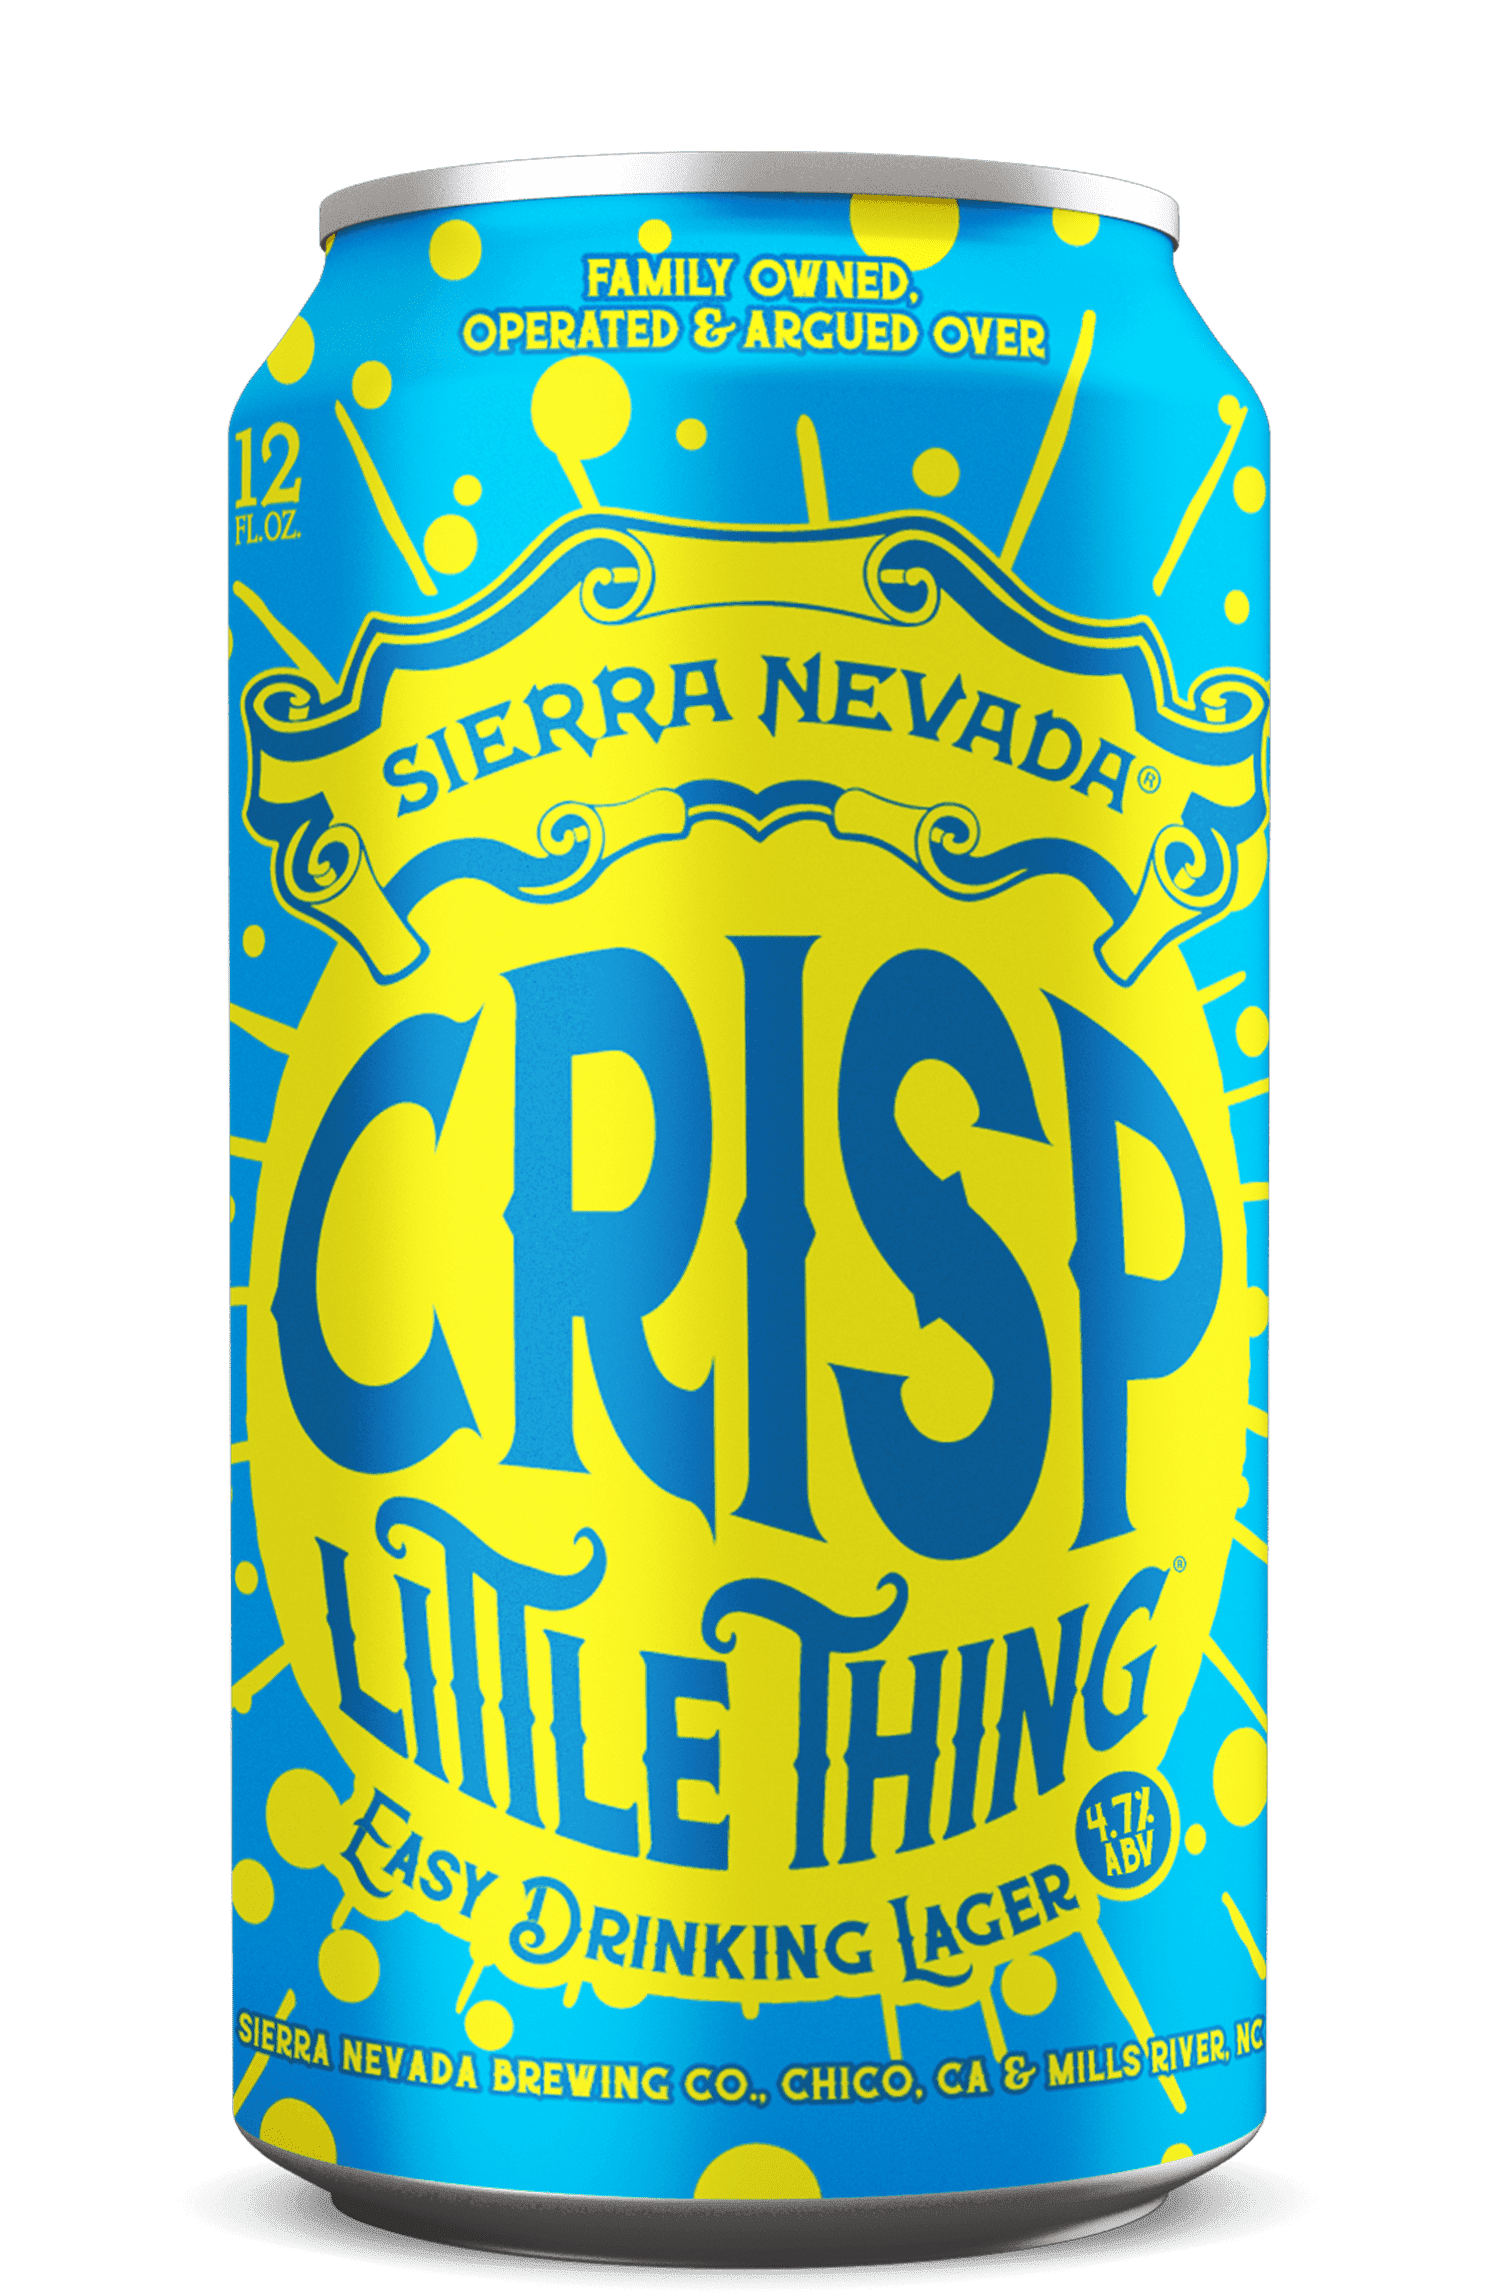 Crisp Little Thing can